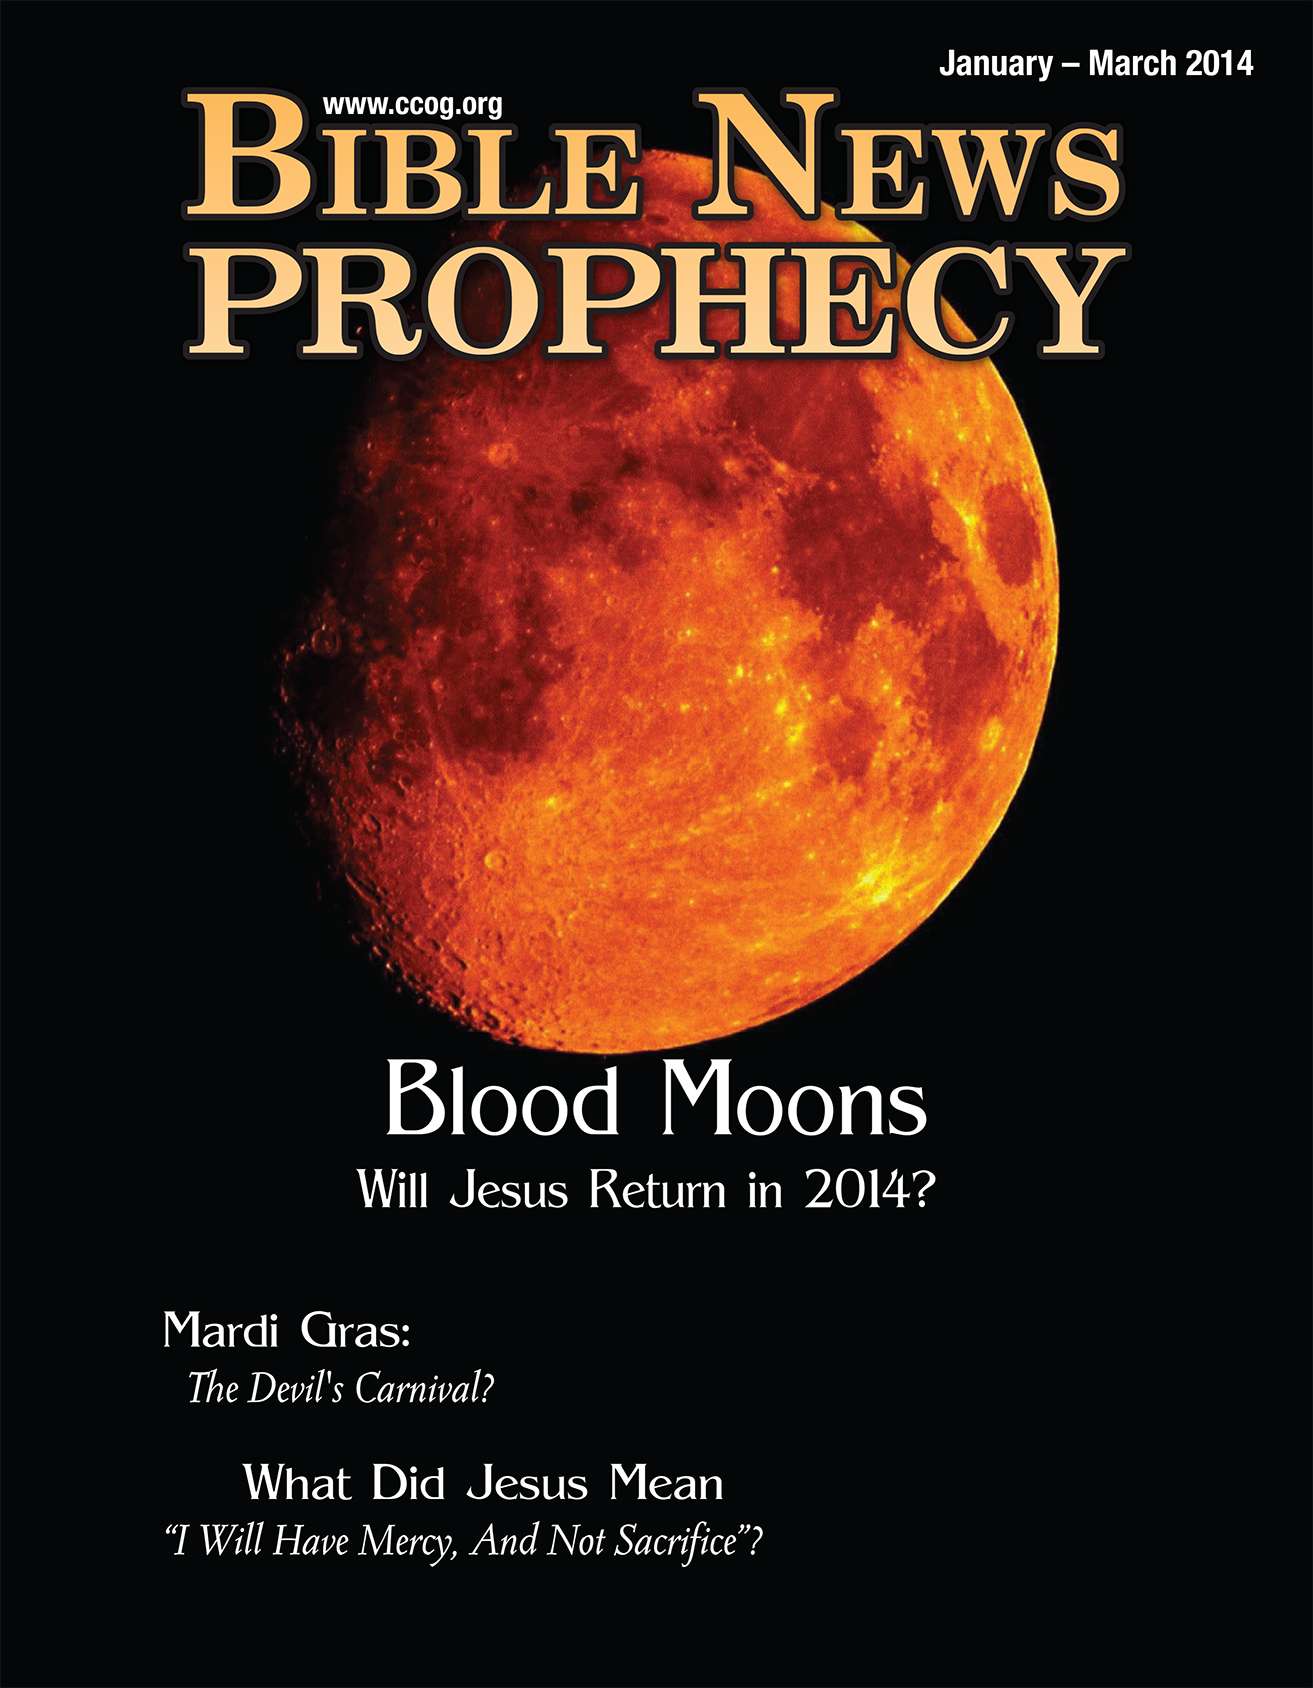 Bible News Prophecy Magazine: Blood Moons: Will Jesus Return in 2014?